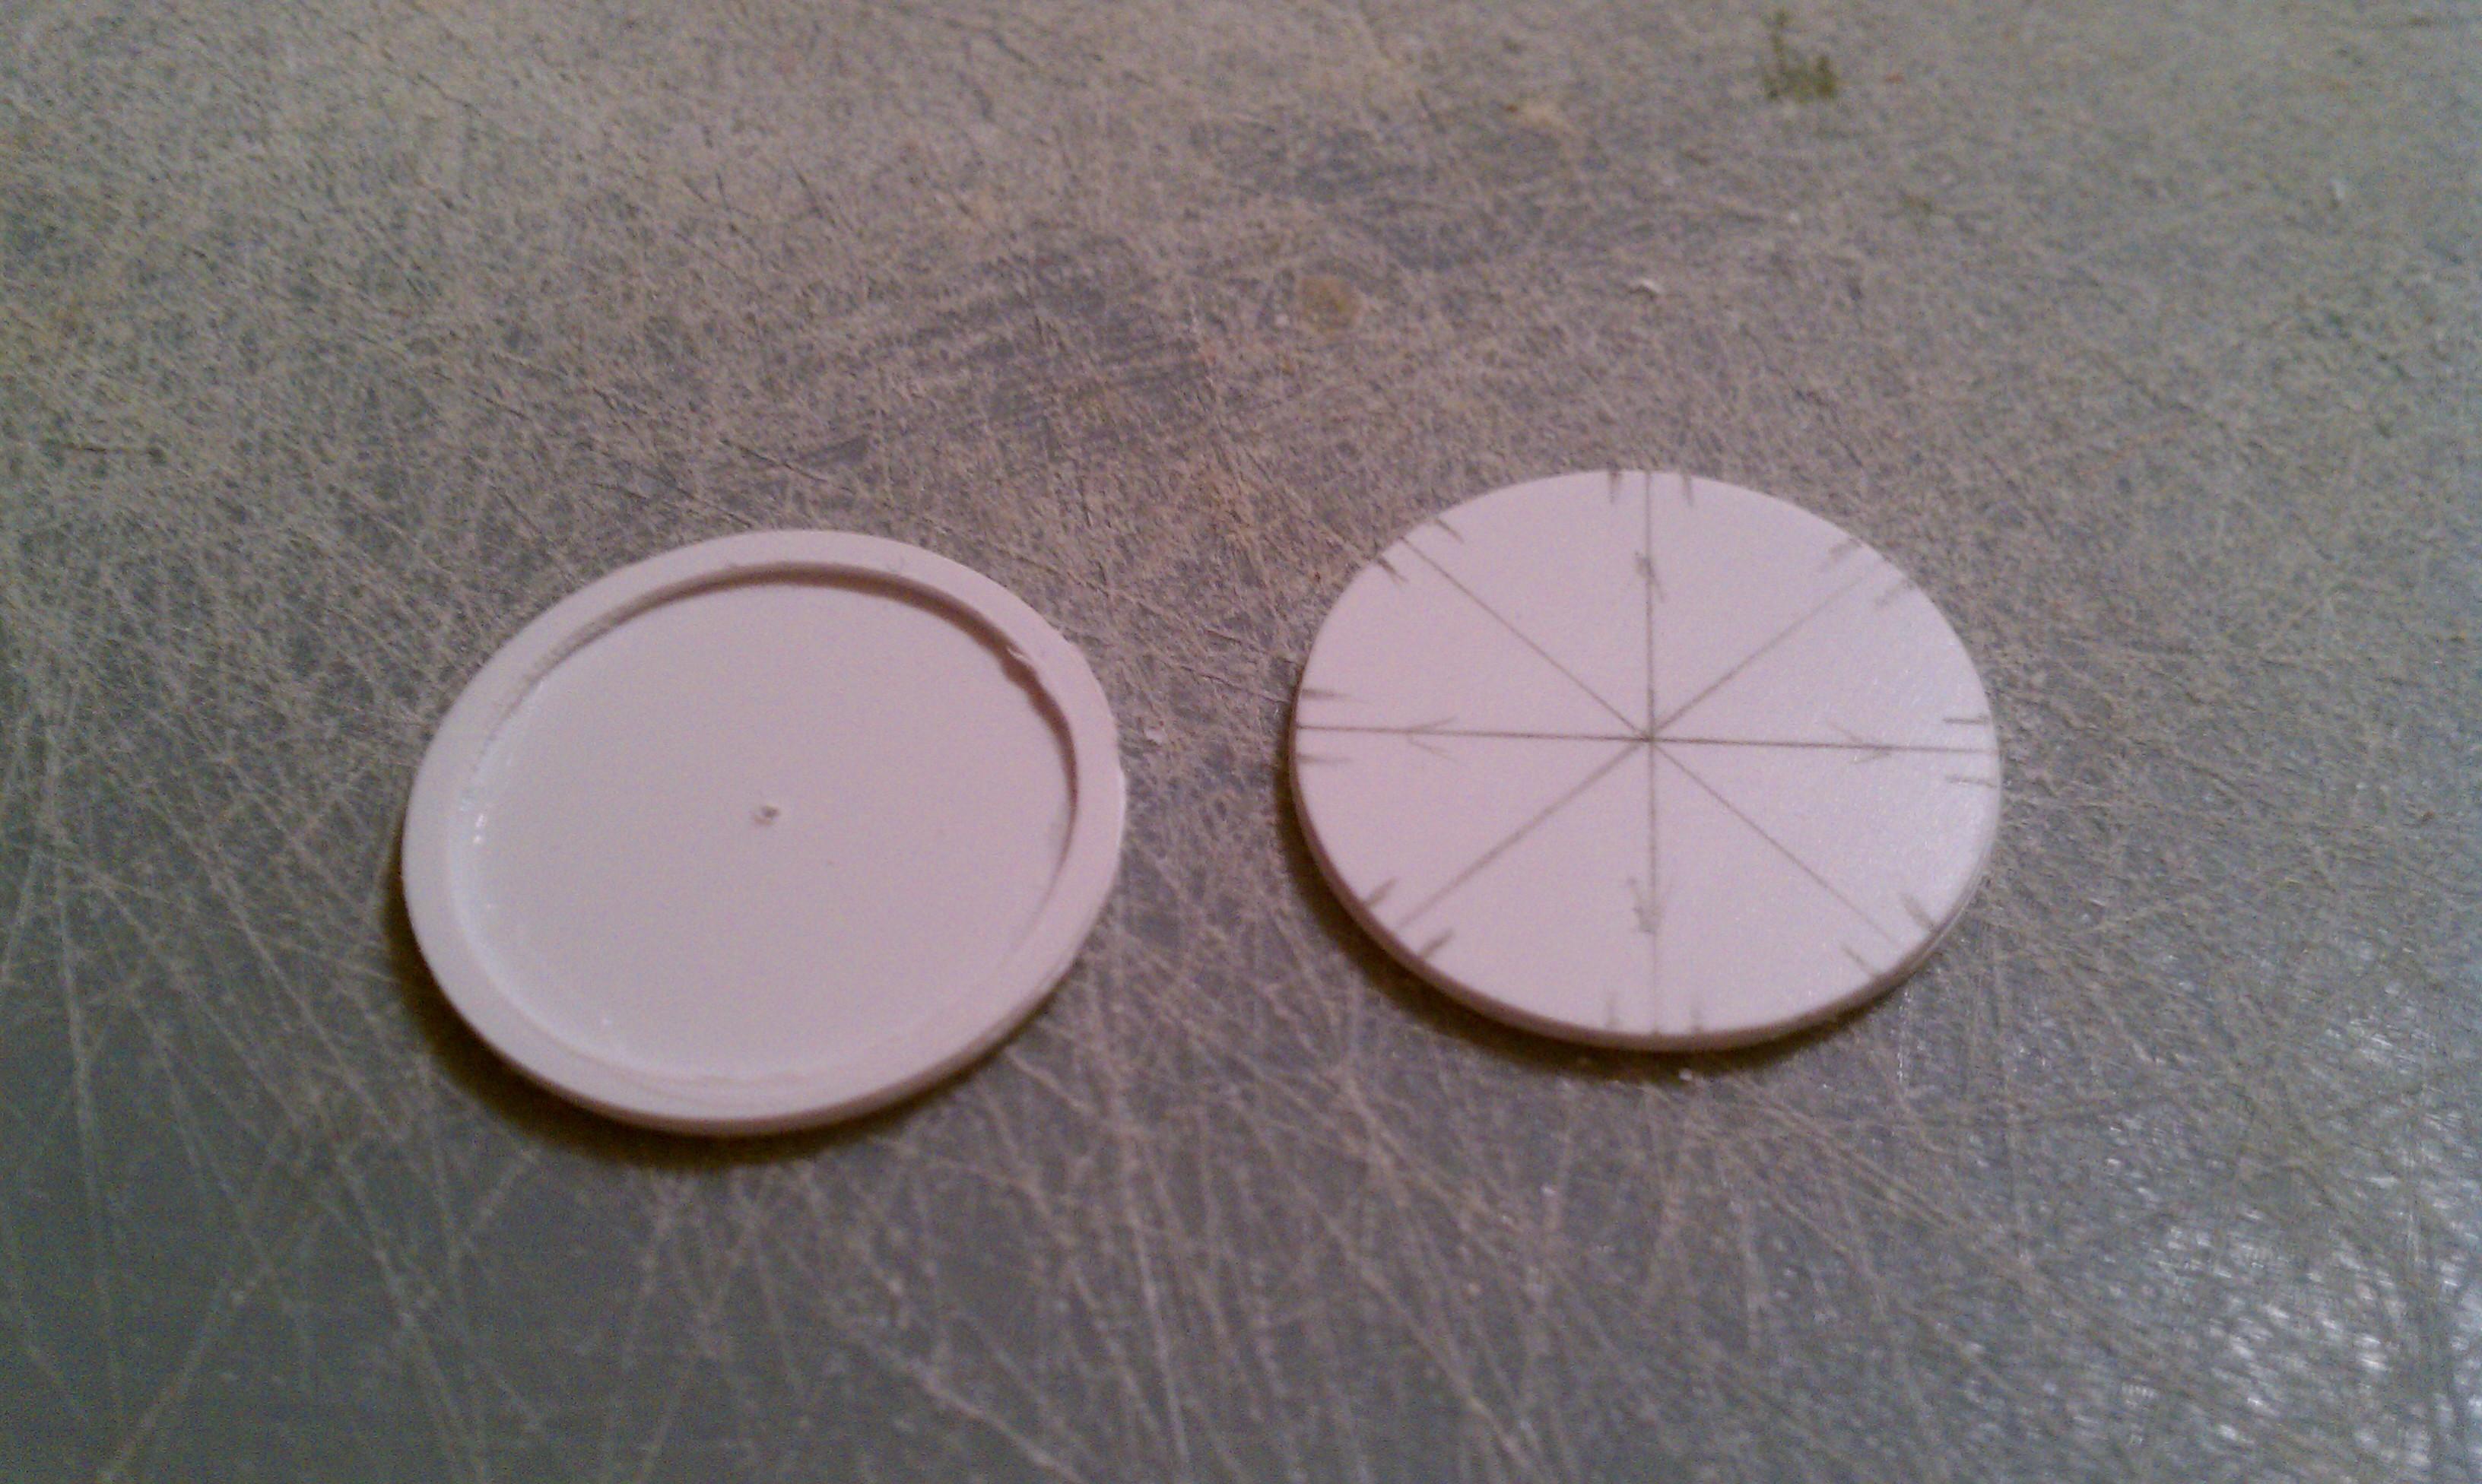 Top disc with middle ring